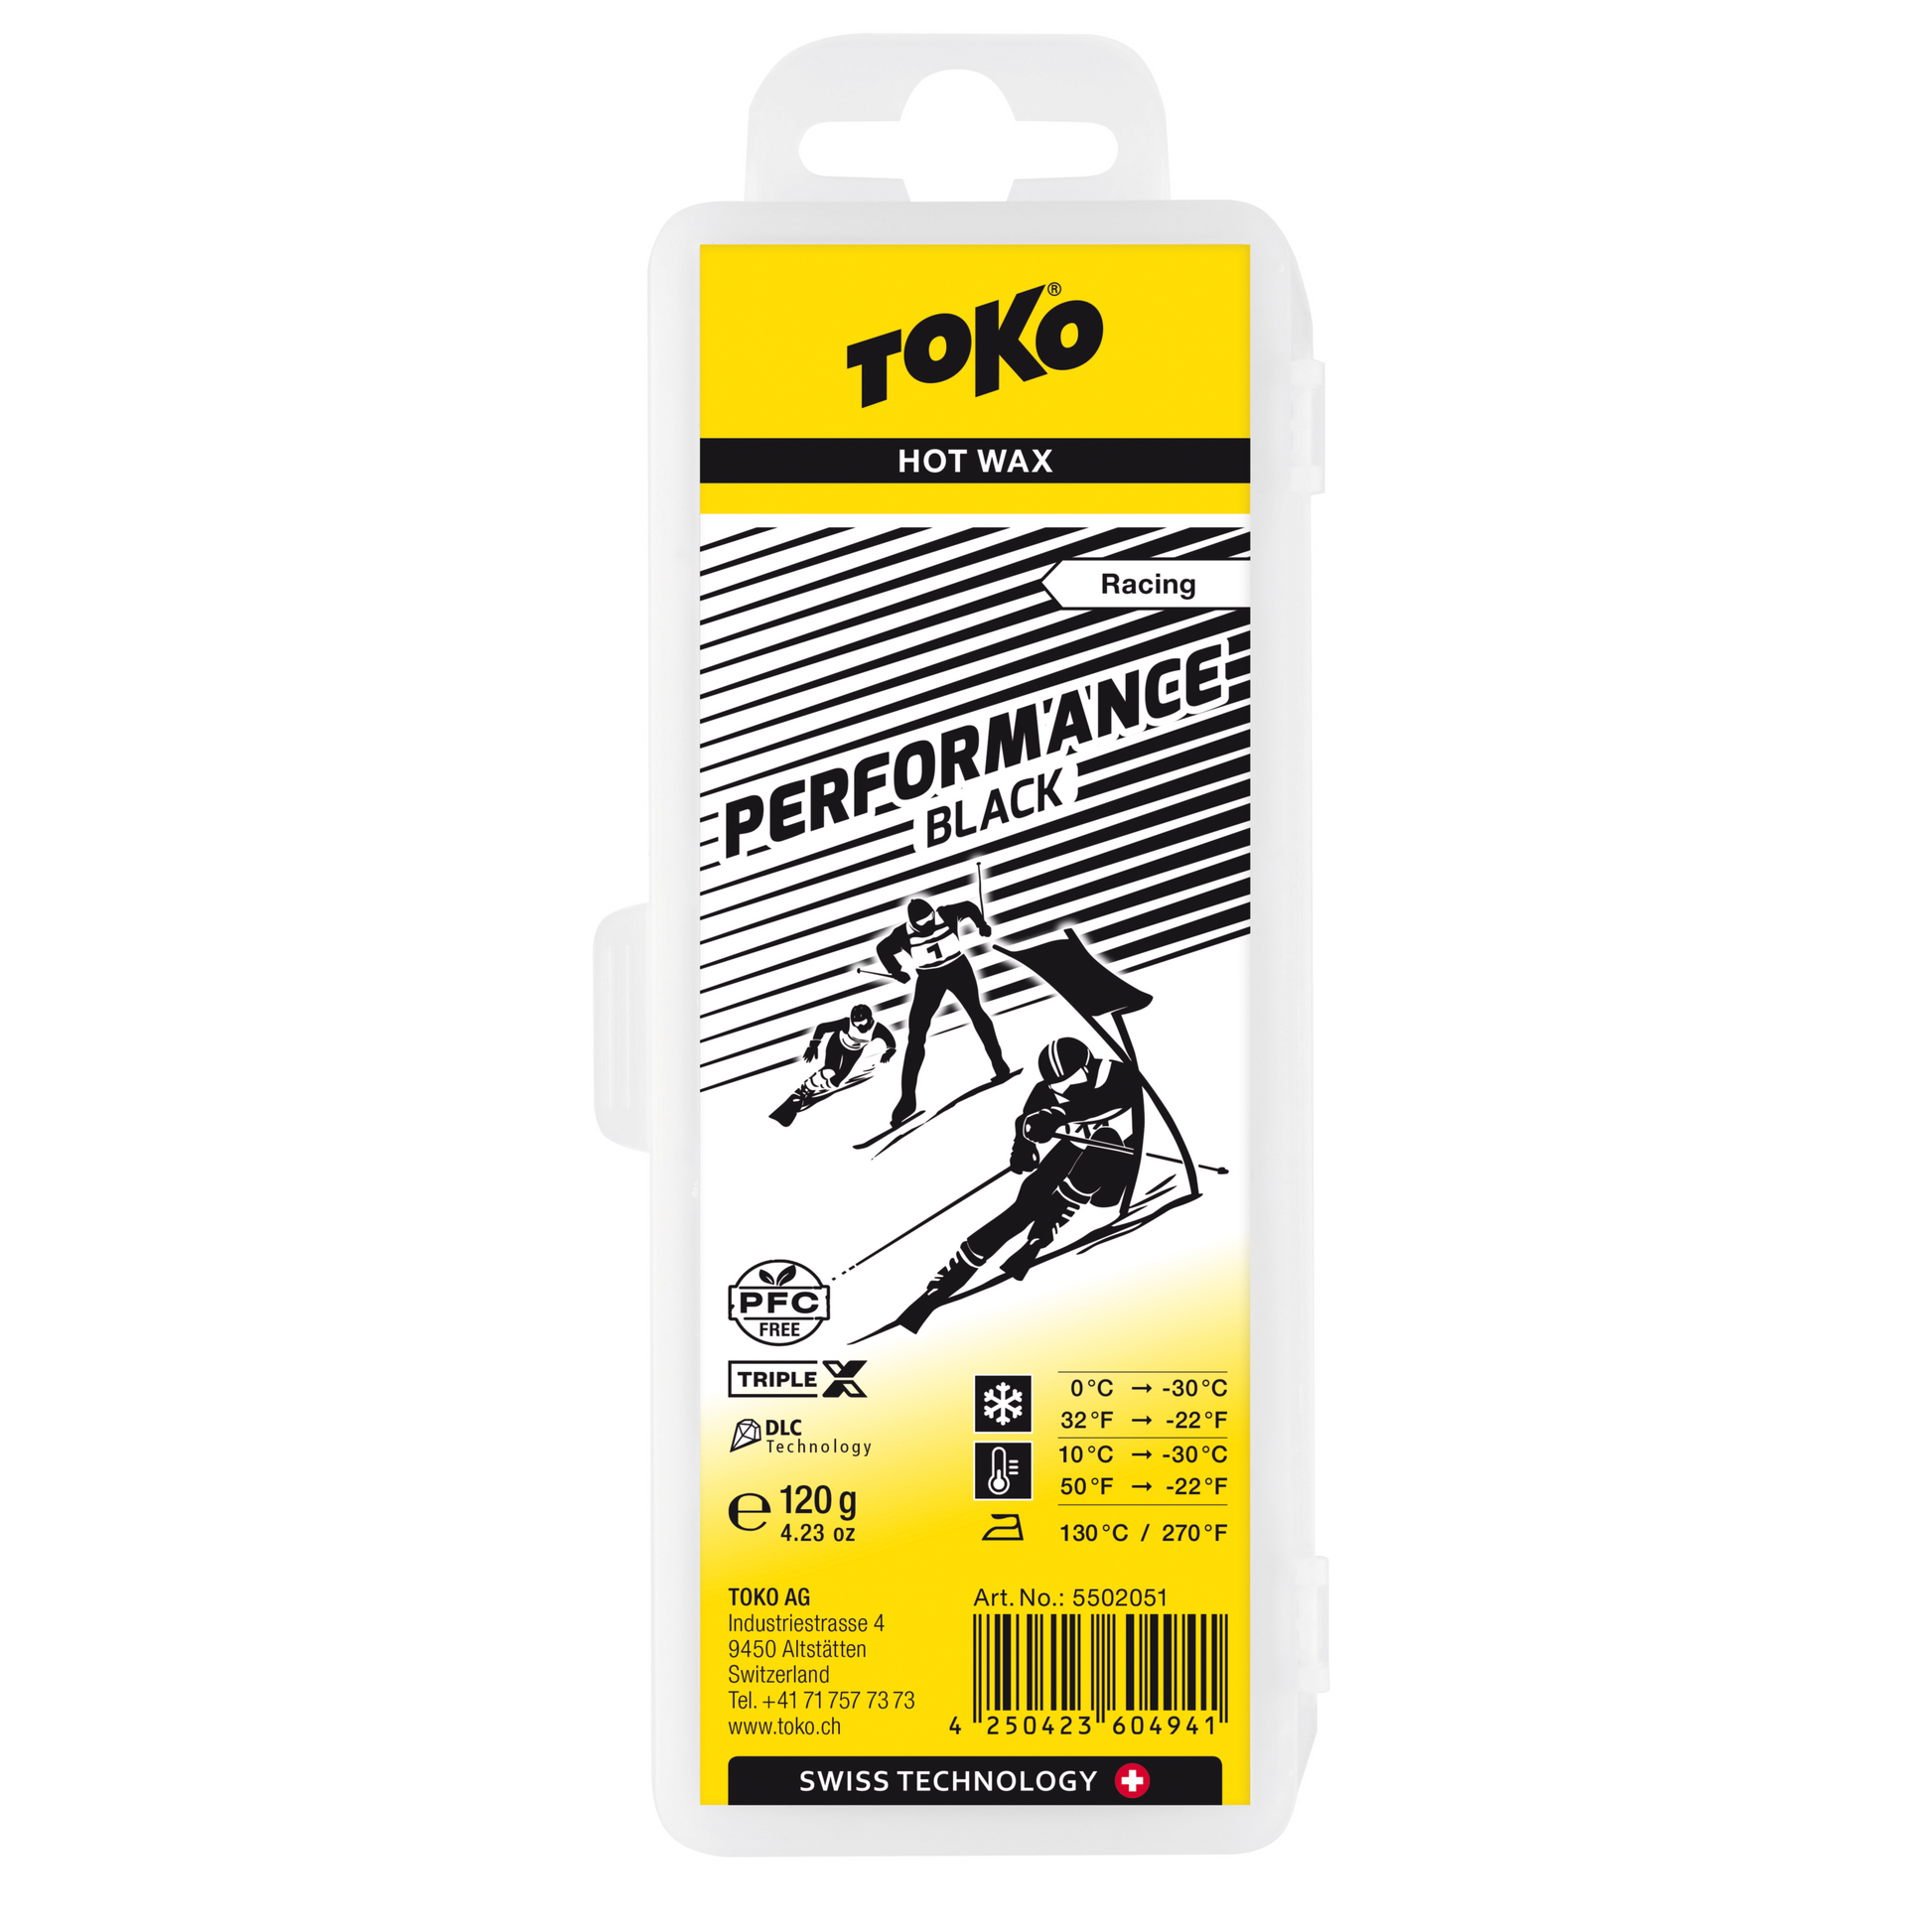 A product picture of the Toko Performance Black Paraffin Melt Wax